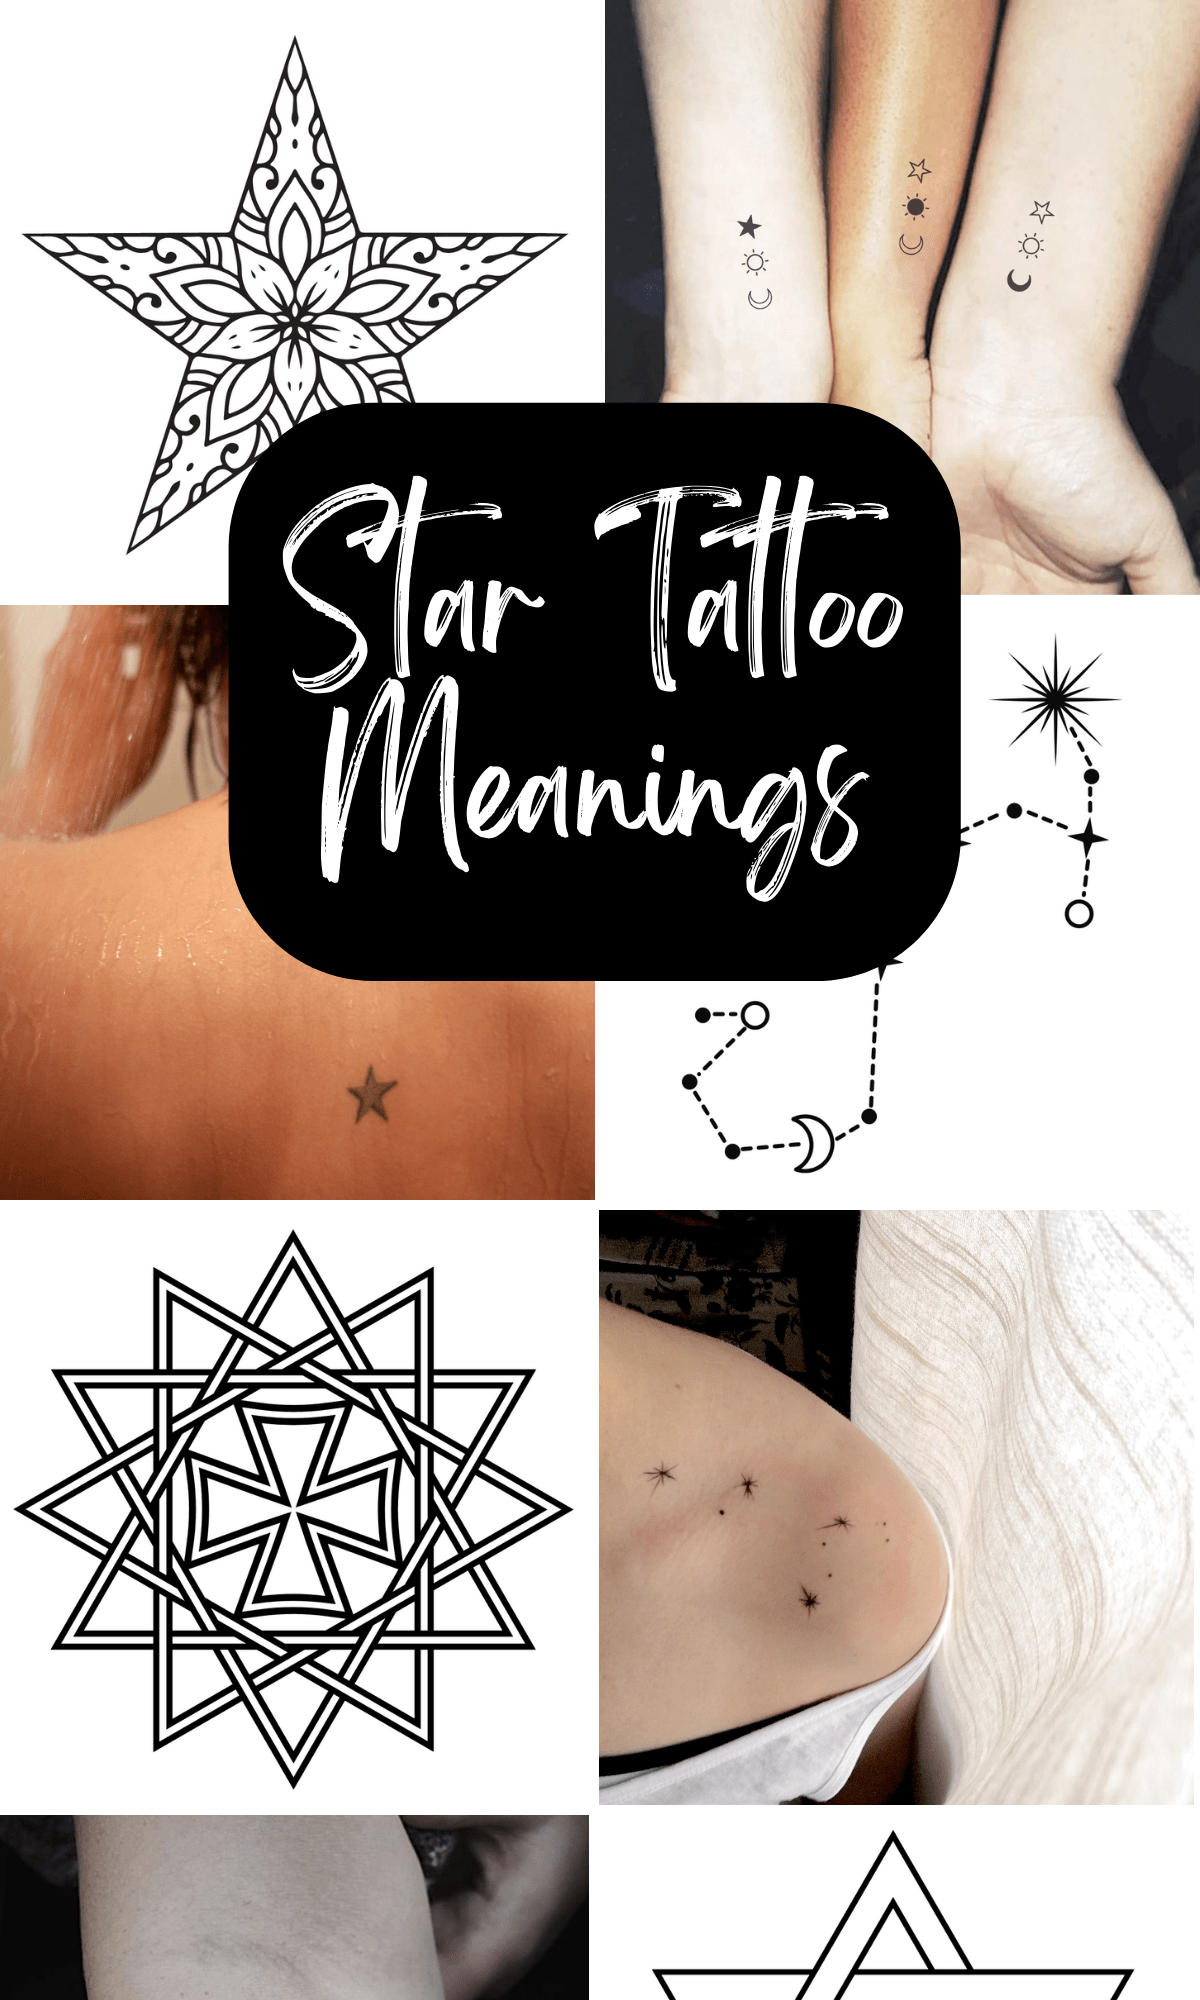 Tattoo Designs And Their Meaning